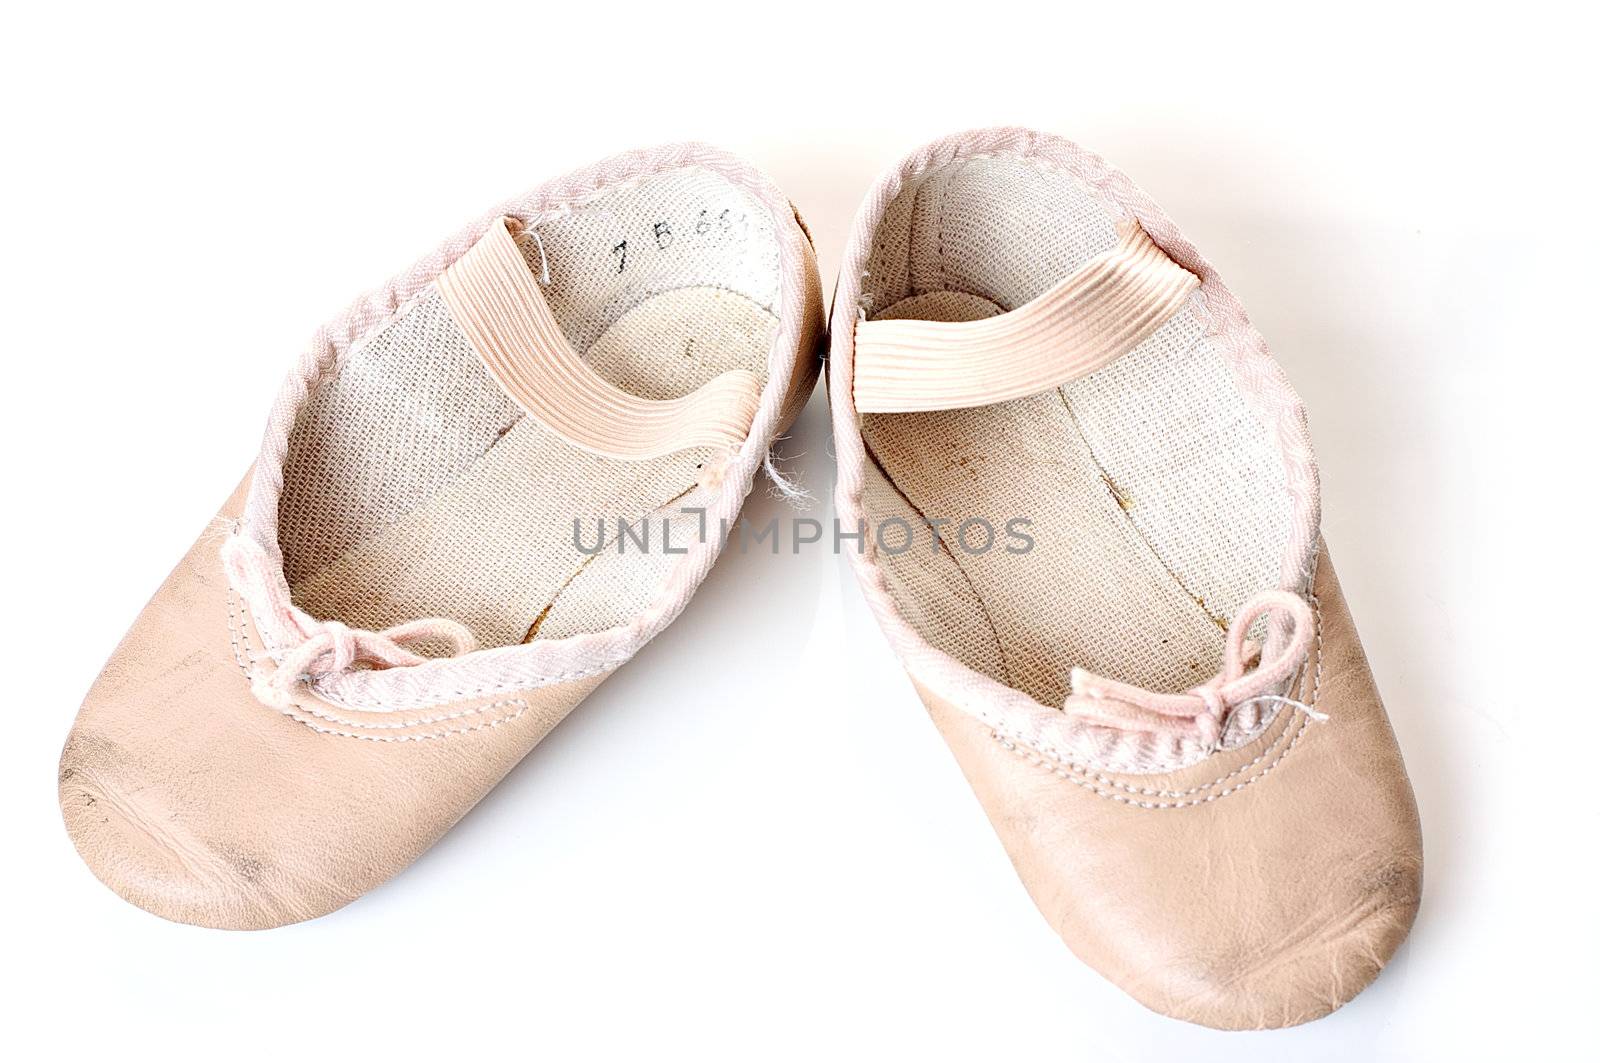 Small pink ballet shoes by Talanis